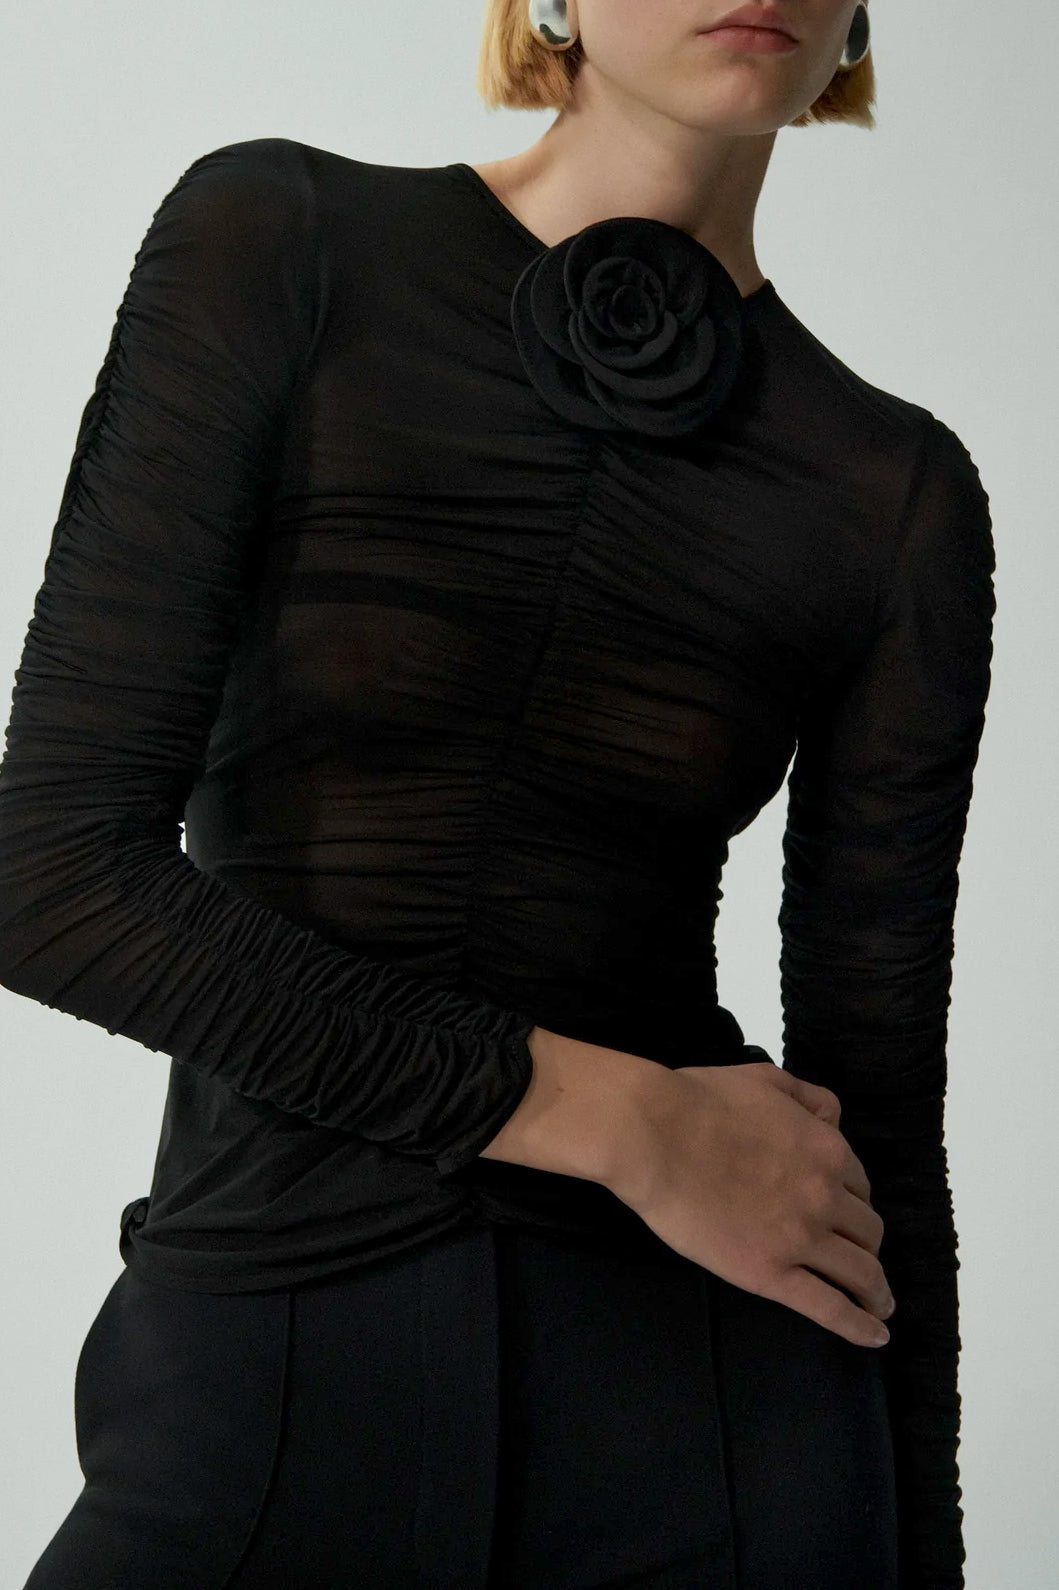 Bluse Sheer Ruched Rose in SchwarzMagda Butrym - Anita Hass